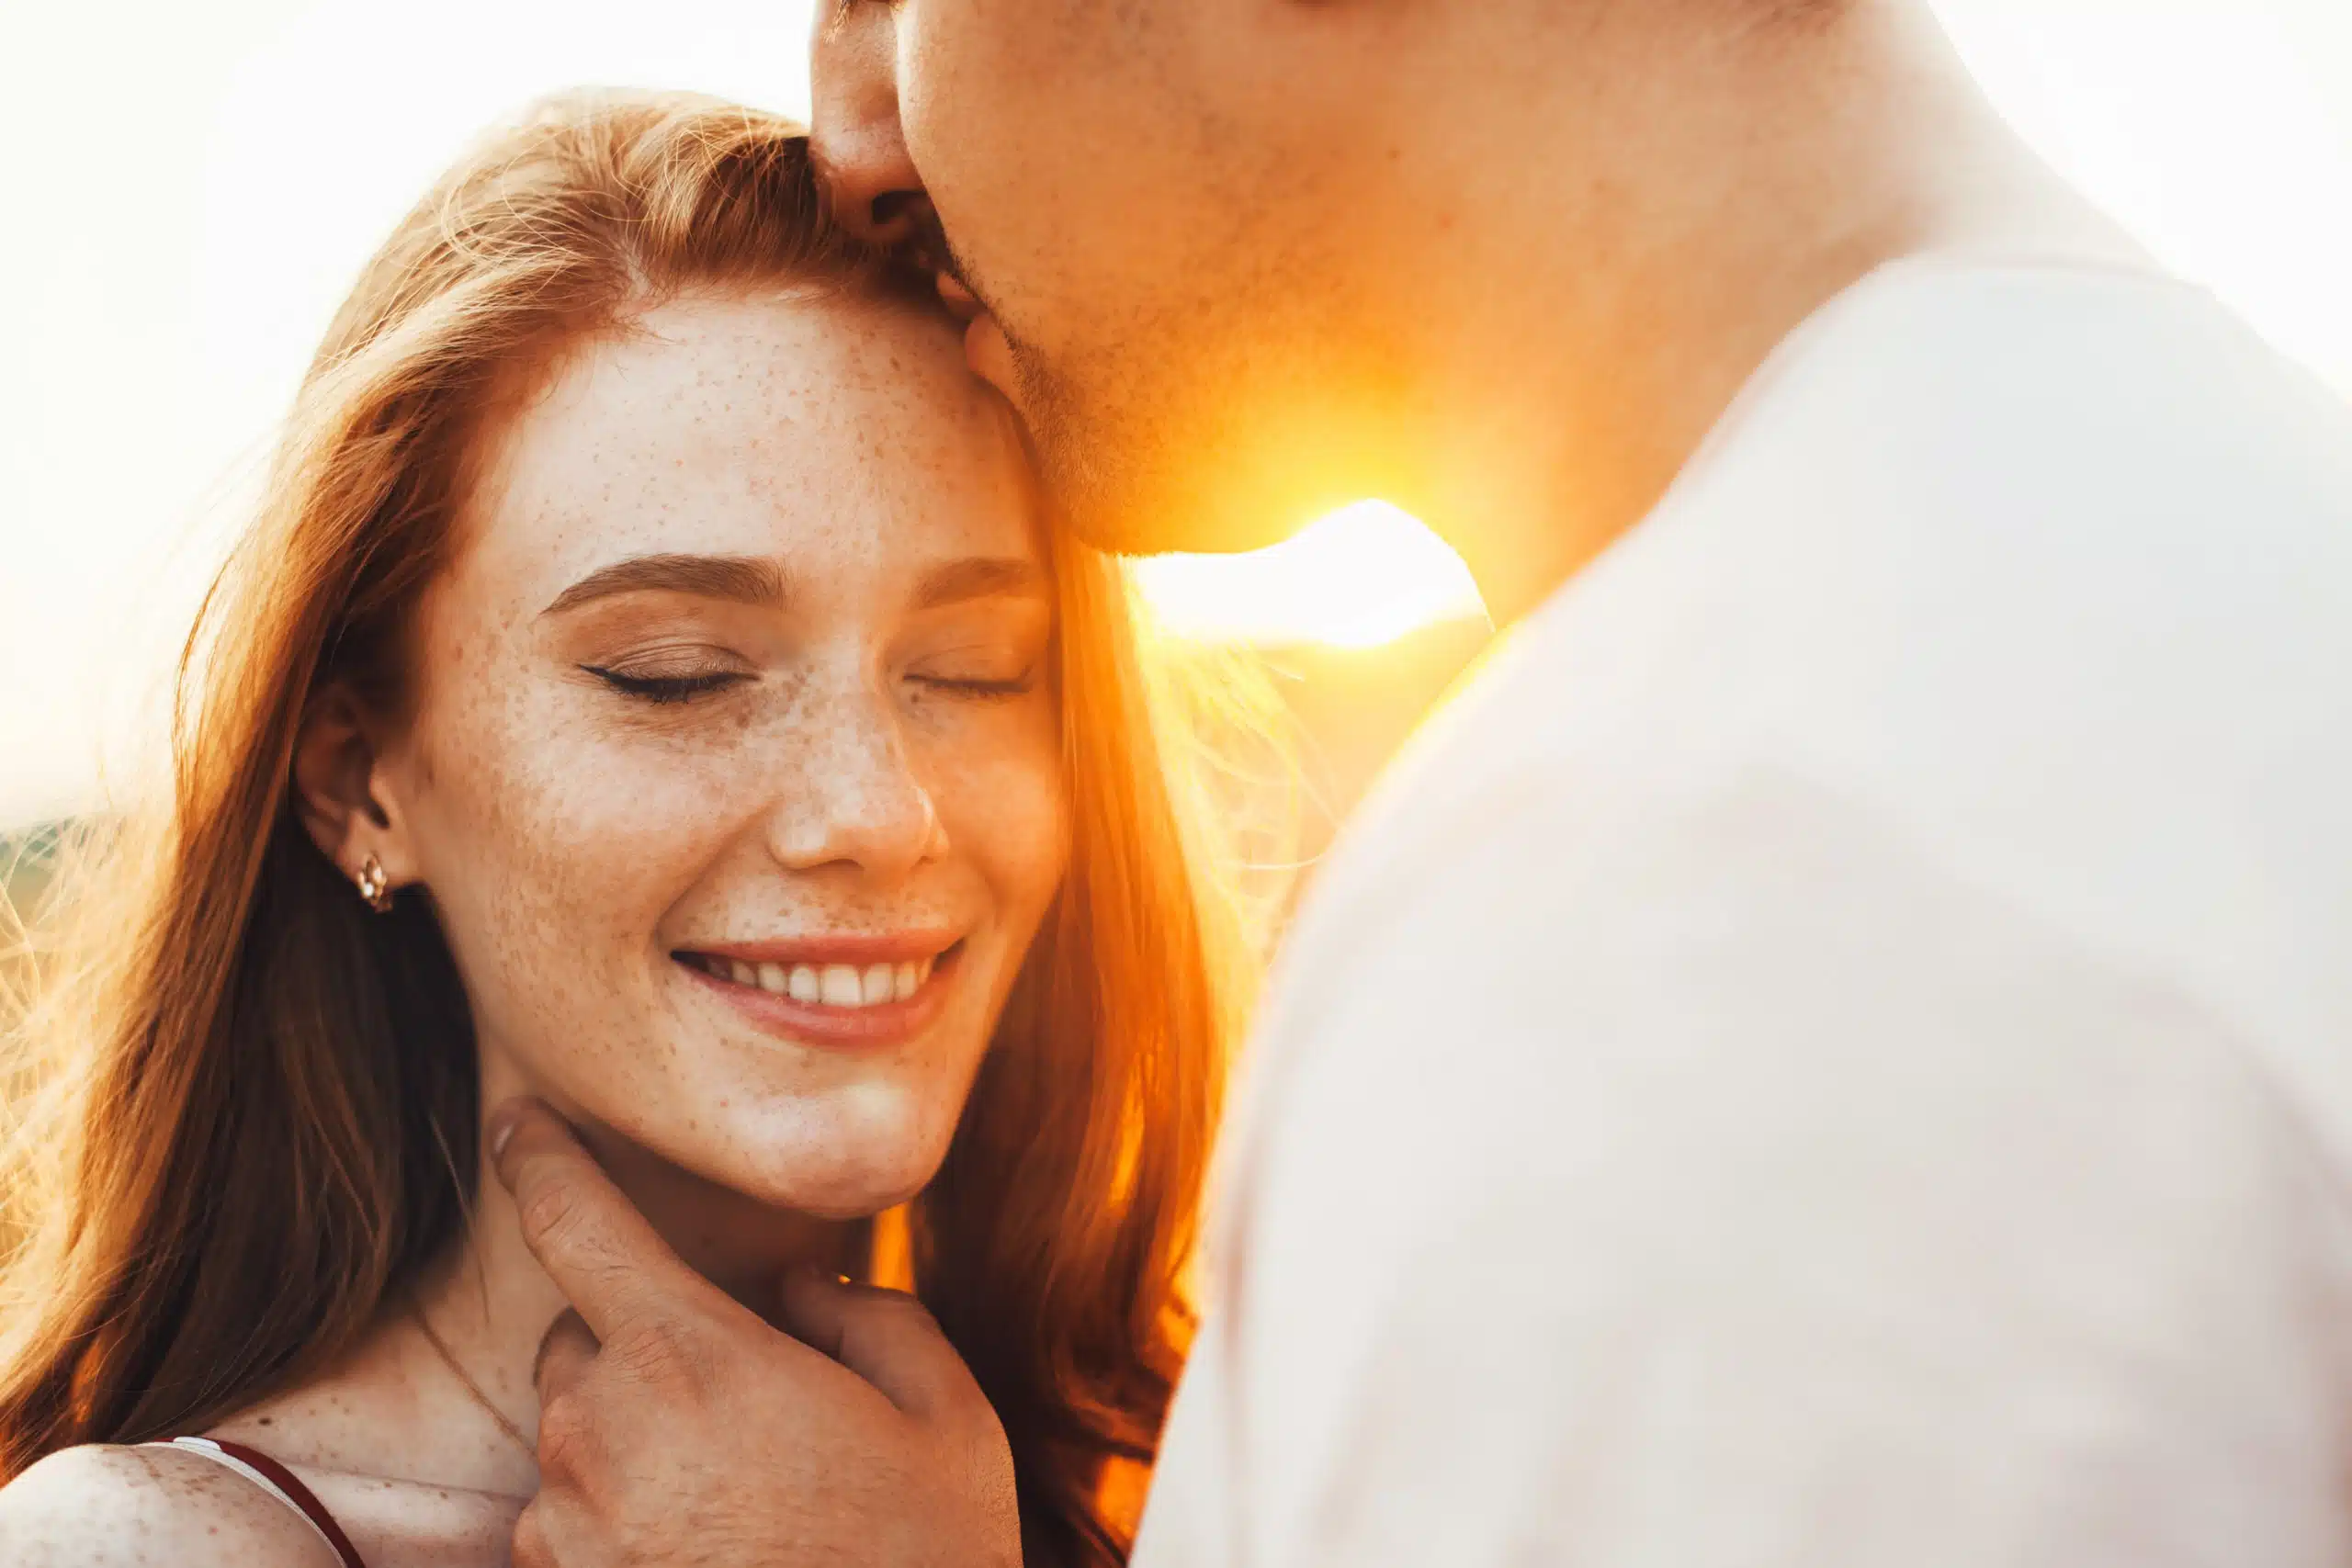 Freckled woman smiling as she is kissed on the forehead by her boyfriend